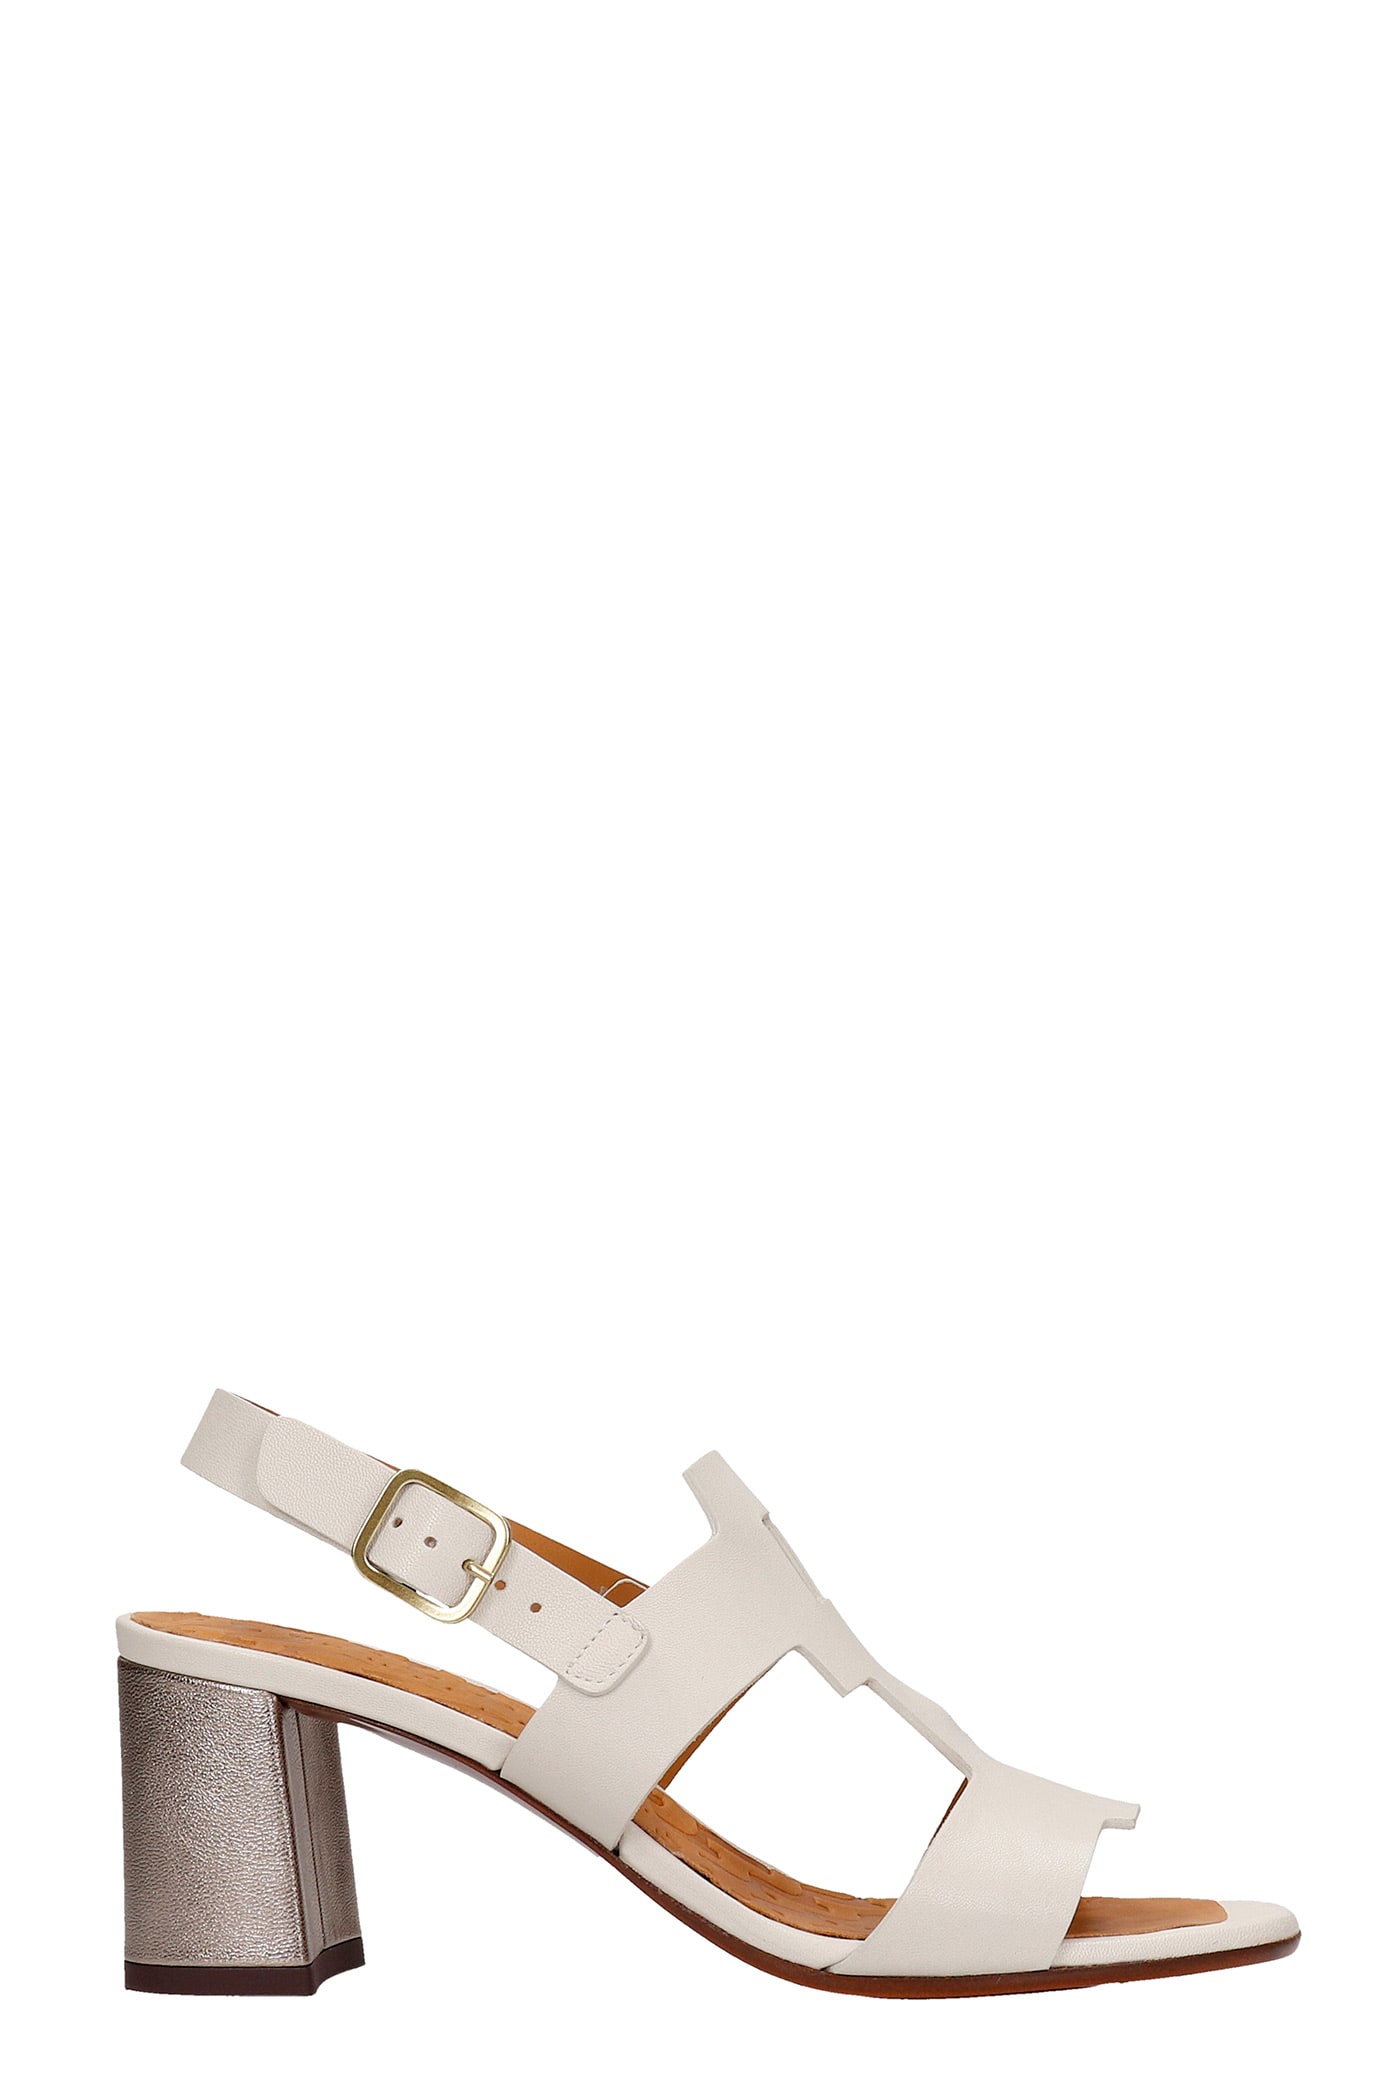 Chie Mihara Lusca Sandals In Beige Leather